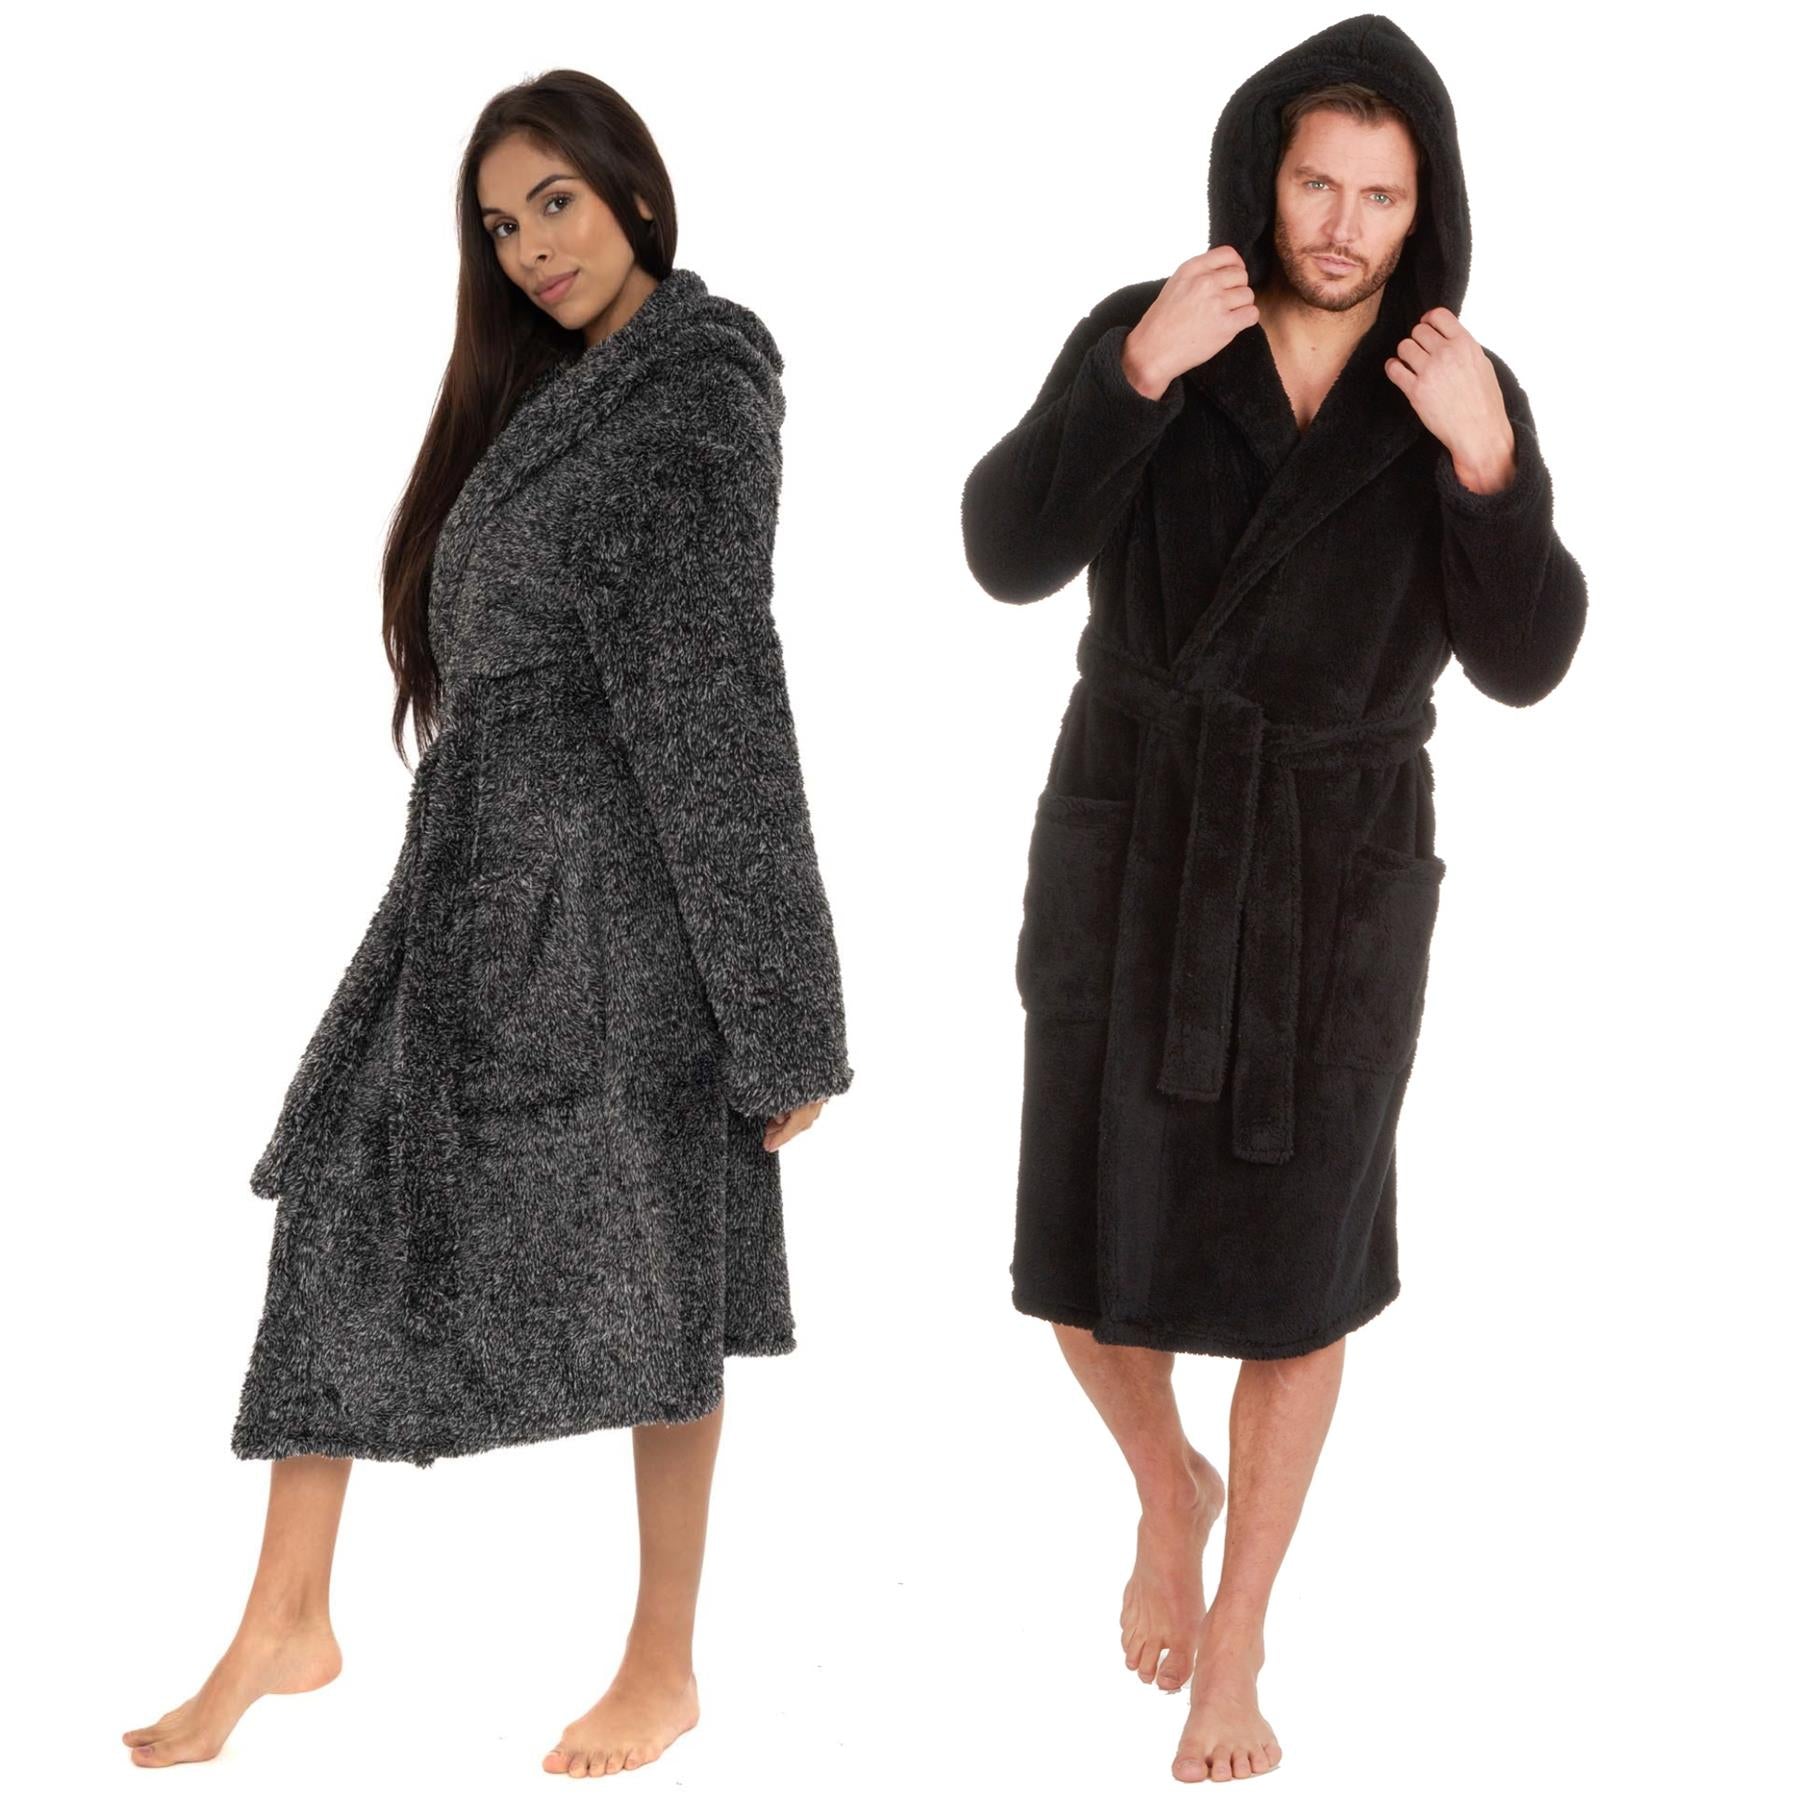 His and Hers Hooded Dressing Gowns